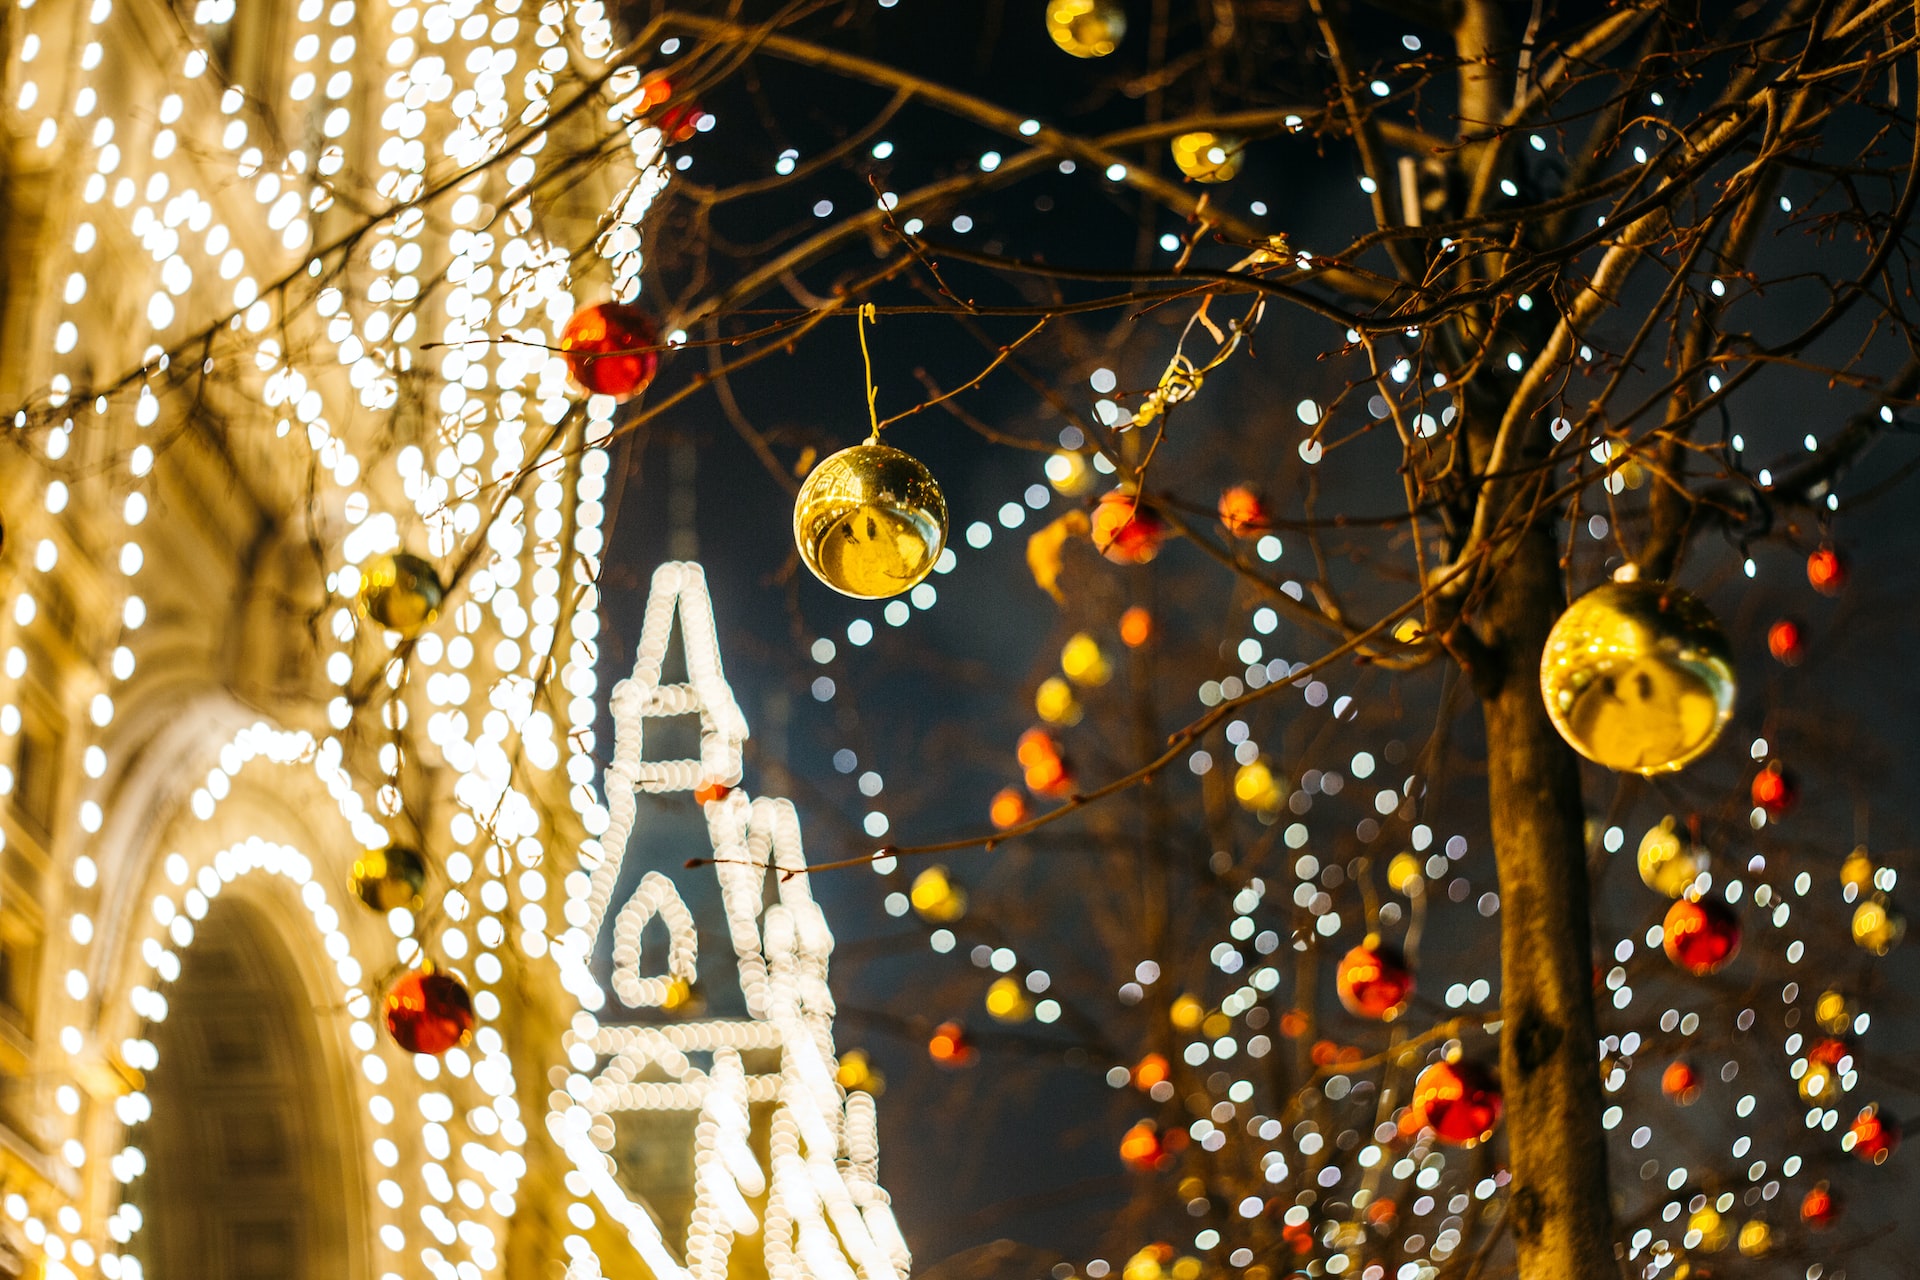 A dazzling display of Christmas lights and ornaments hung up outside.